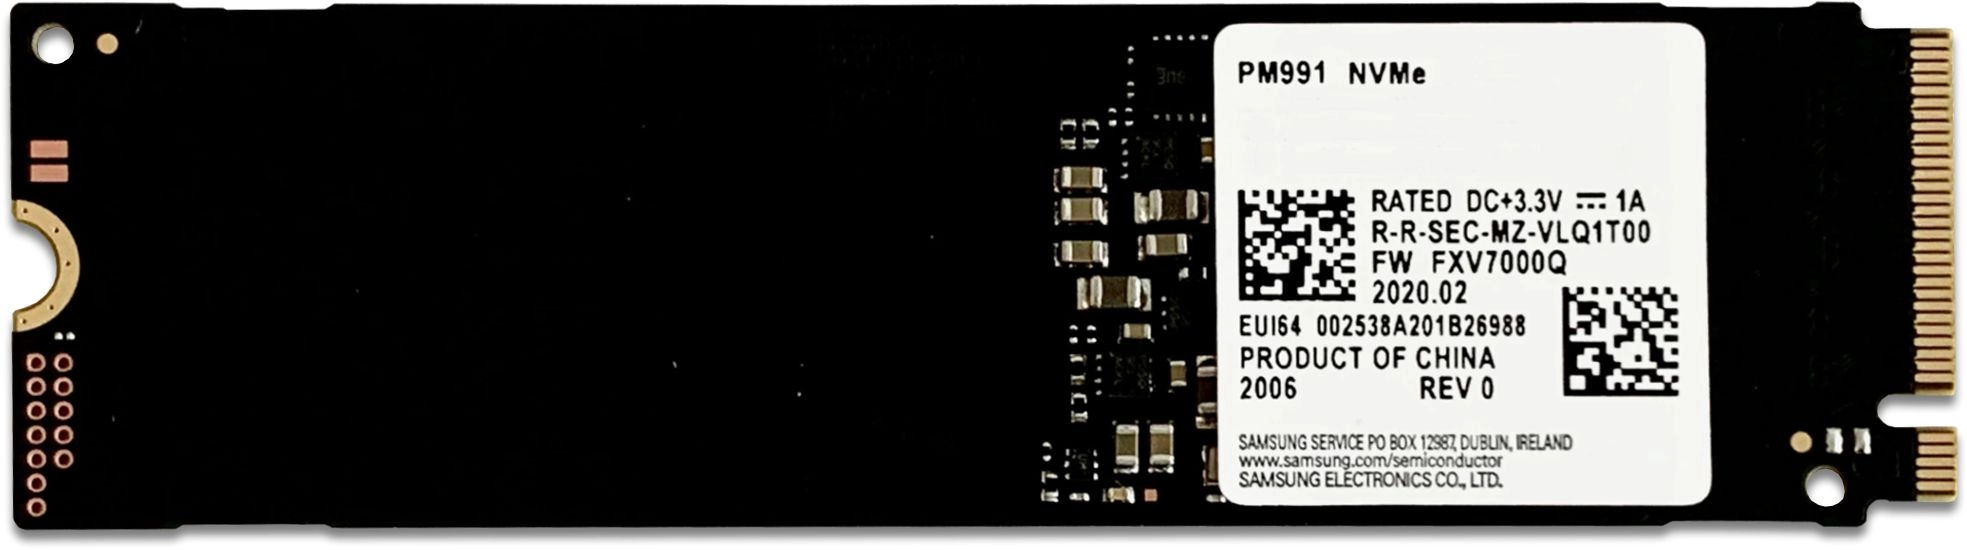 M.2 NVMe SSD 128GB Samsung PM991, Interface: PCIe3.0 x4 / NVMe1.2, M2 Type 2242 form factor, Sequential Read: 2000 MB/s, Sequential Write: 1000 MB/s, Max Random 4k: Read / Write: 64K IOPS/220K IOPS, Samsung Phoenix controller, V-NAND TLC, Bulk